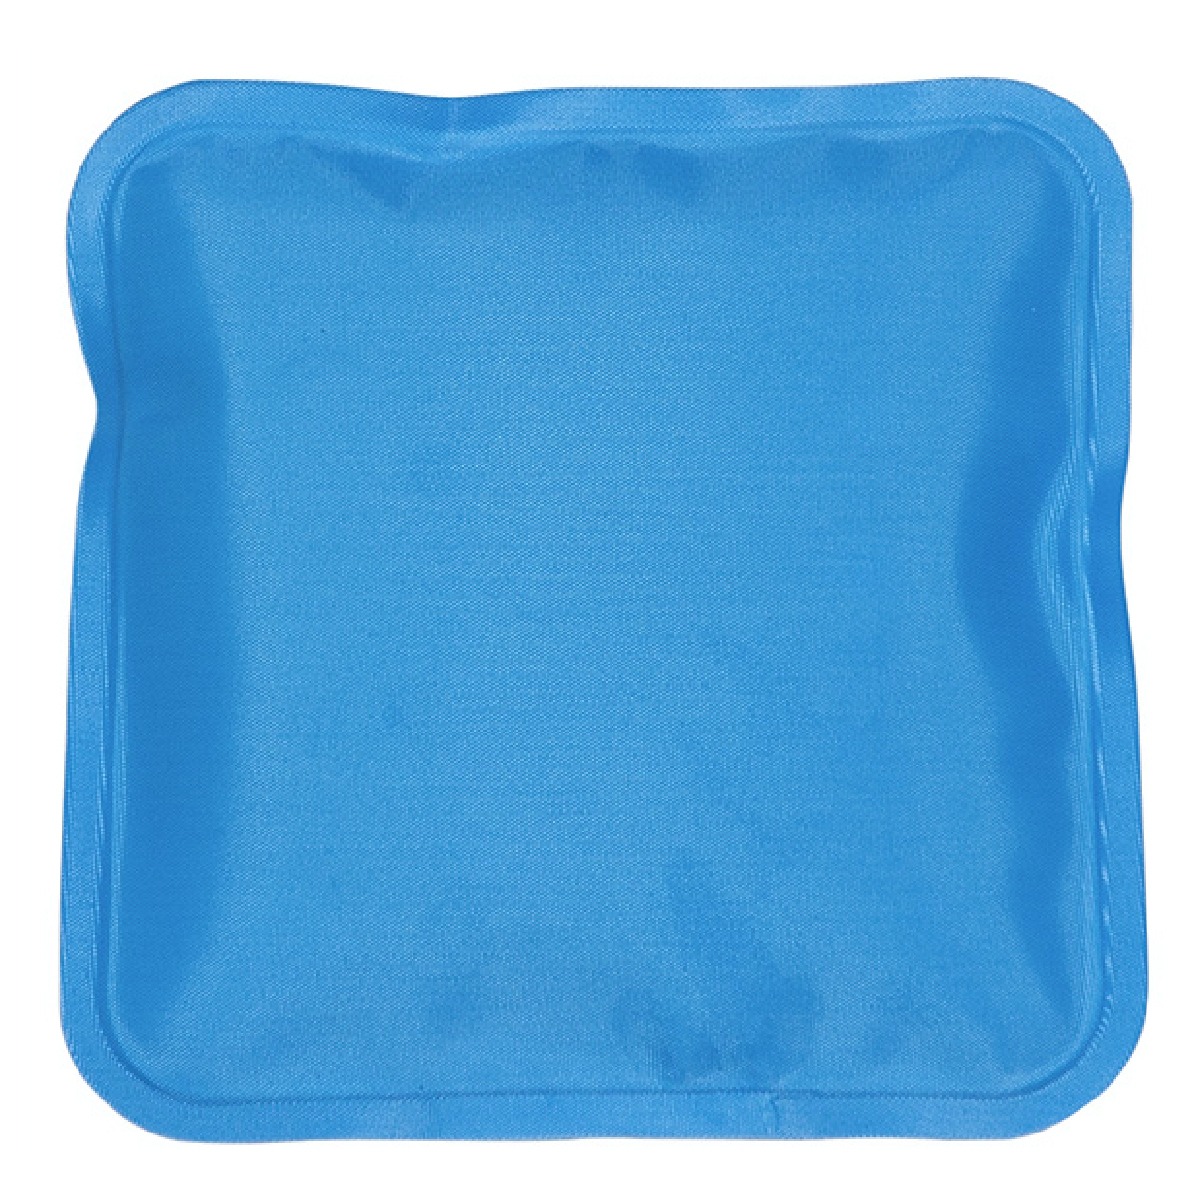 Blue Square Nylon-Covered Hot/Cold Pack